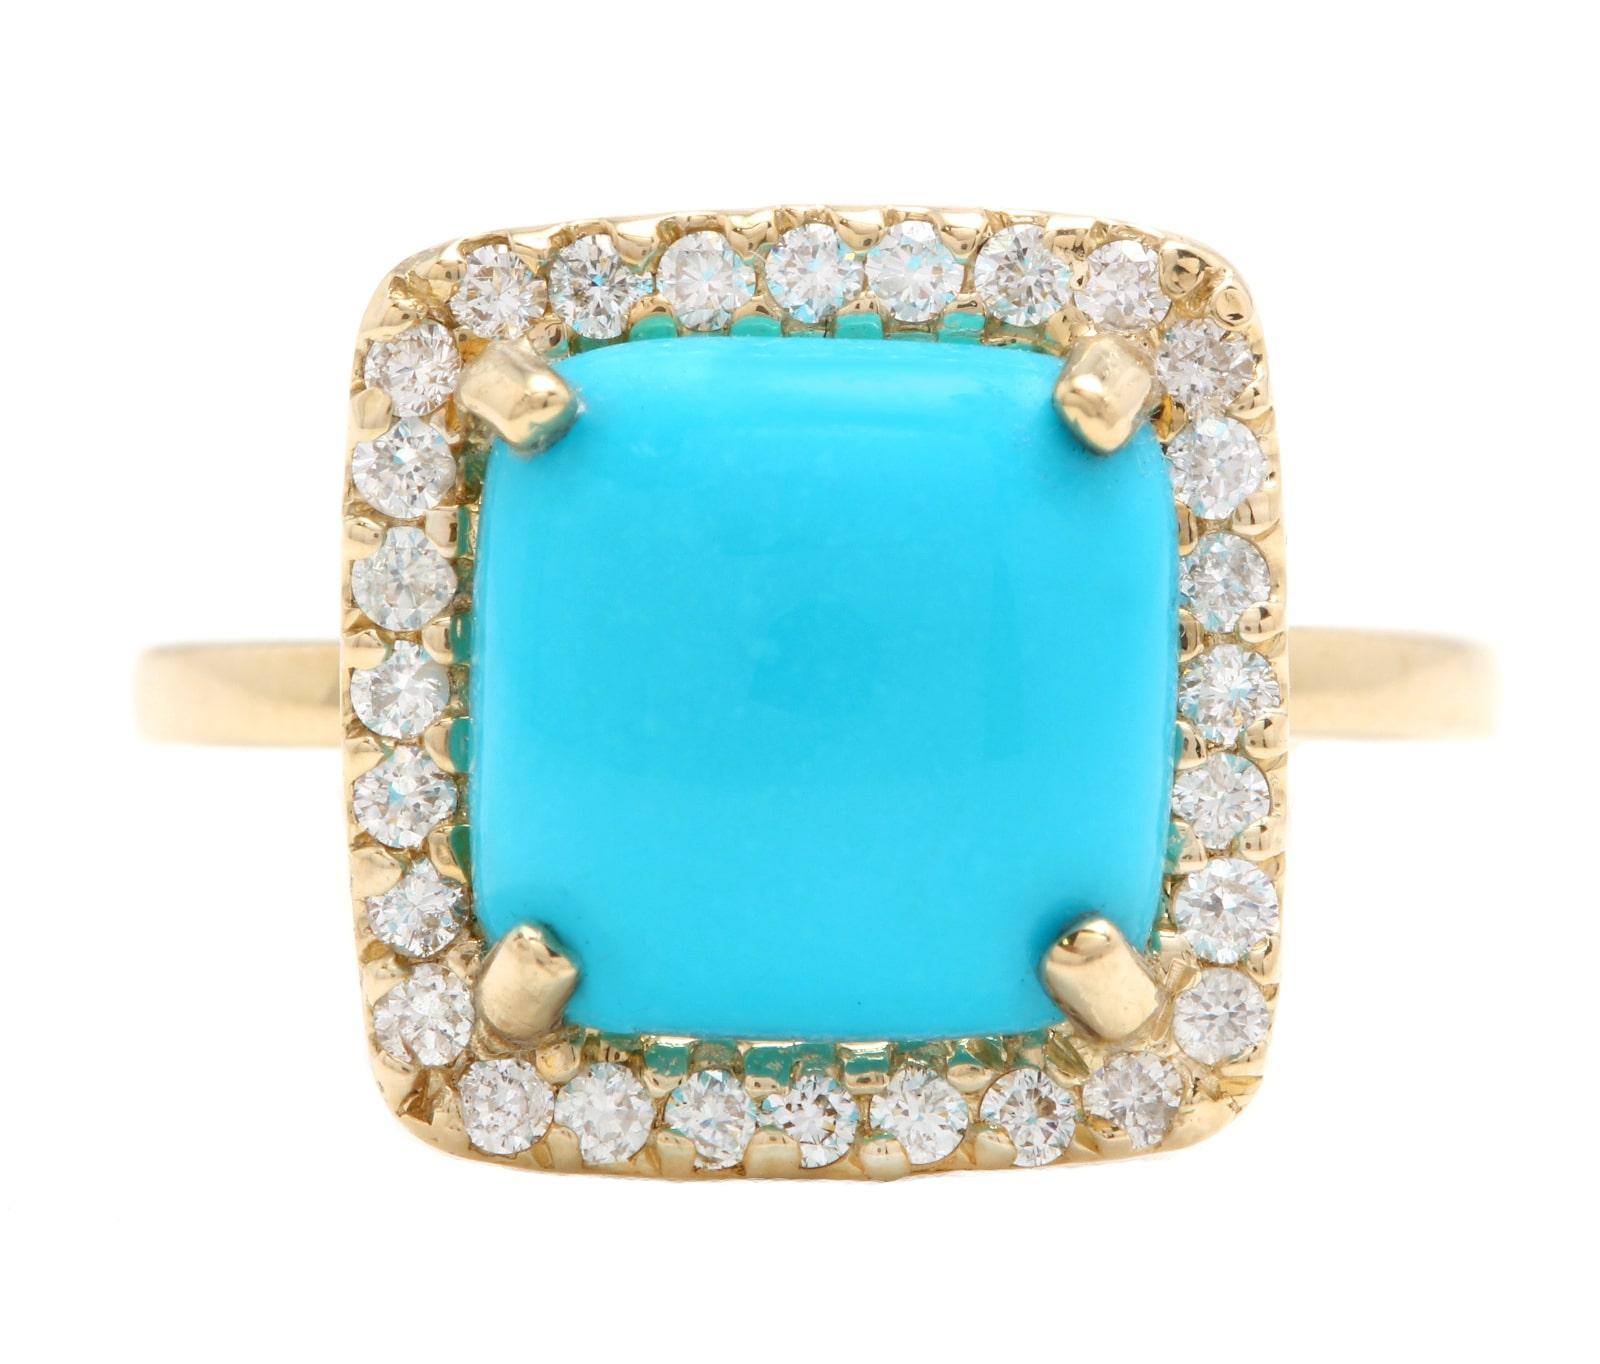 3.60 Carats Impressive Natural Turquoise and Diamond 14K Yellow Gold Ring

Suggested Replacement Value $4,500.00

Total Natural Oval Turquoise Weight is: Approx. 3.20 Carats 

Turquoise Measures: 10.00 x 10.00mm 

Natural Round Diamonds Weight: